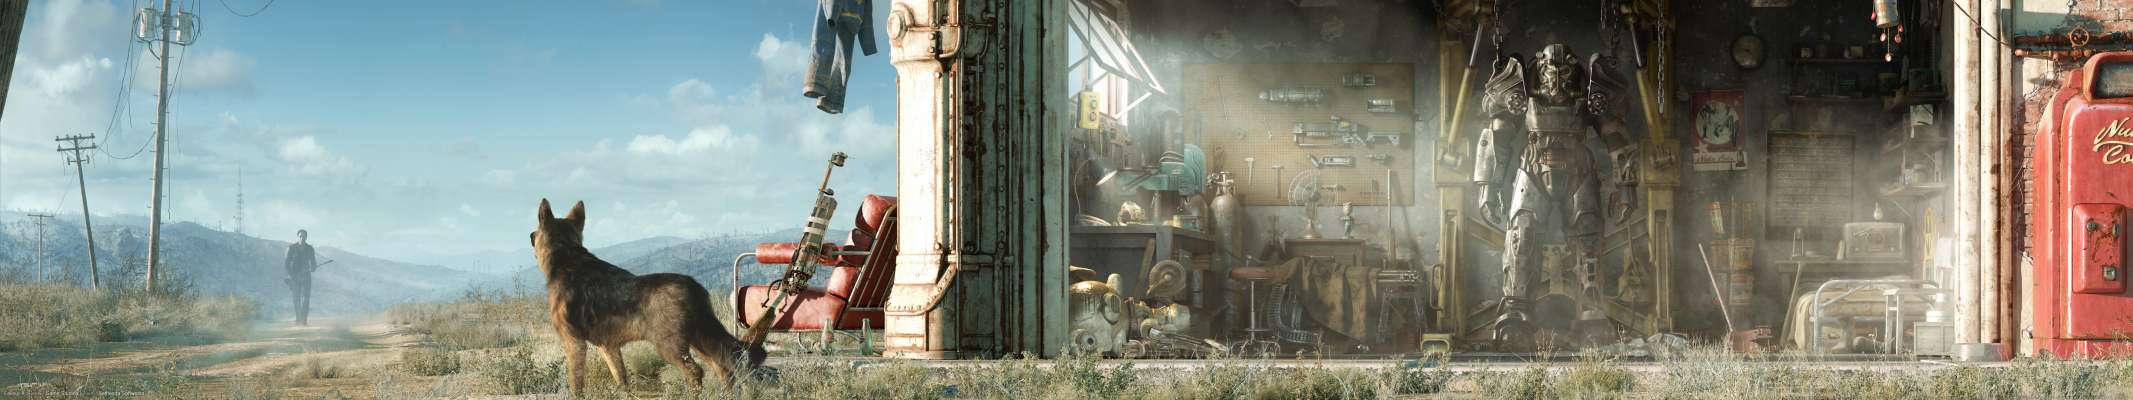 Fallout 4 triple screen wallpaper or background